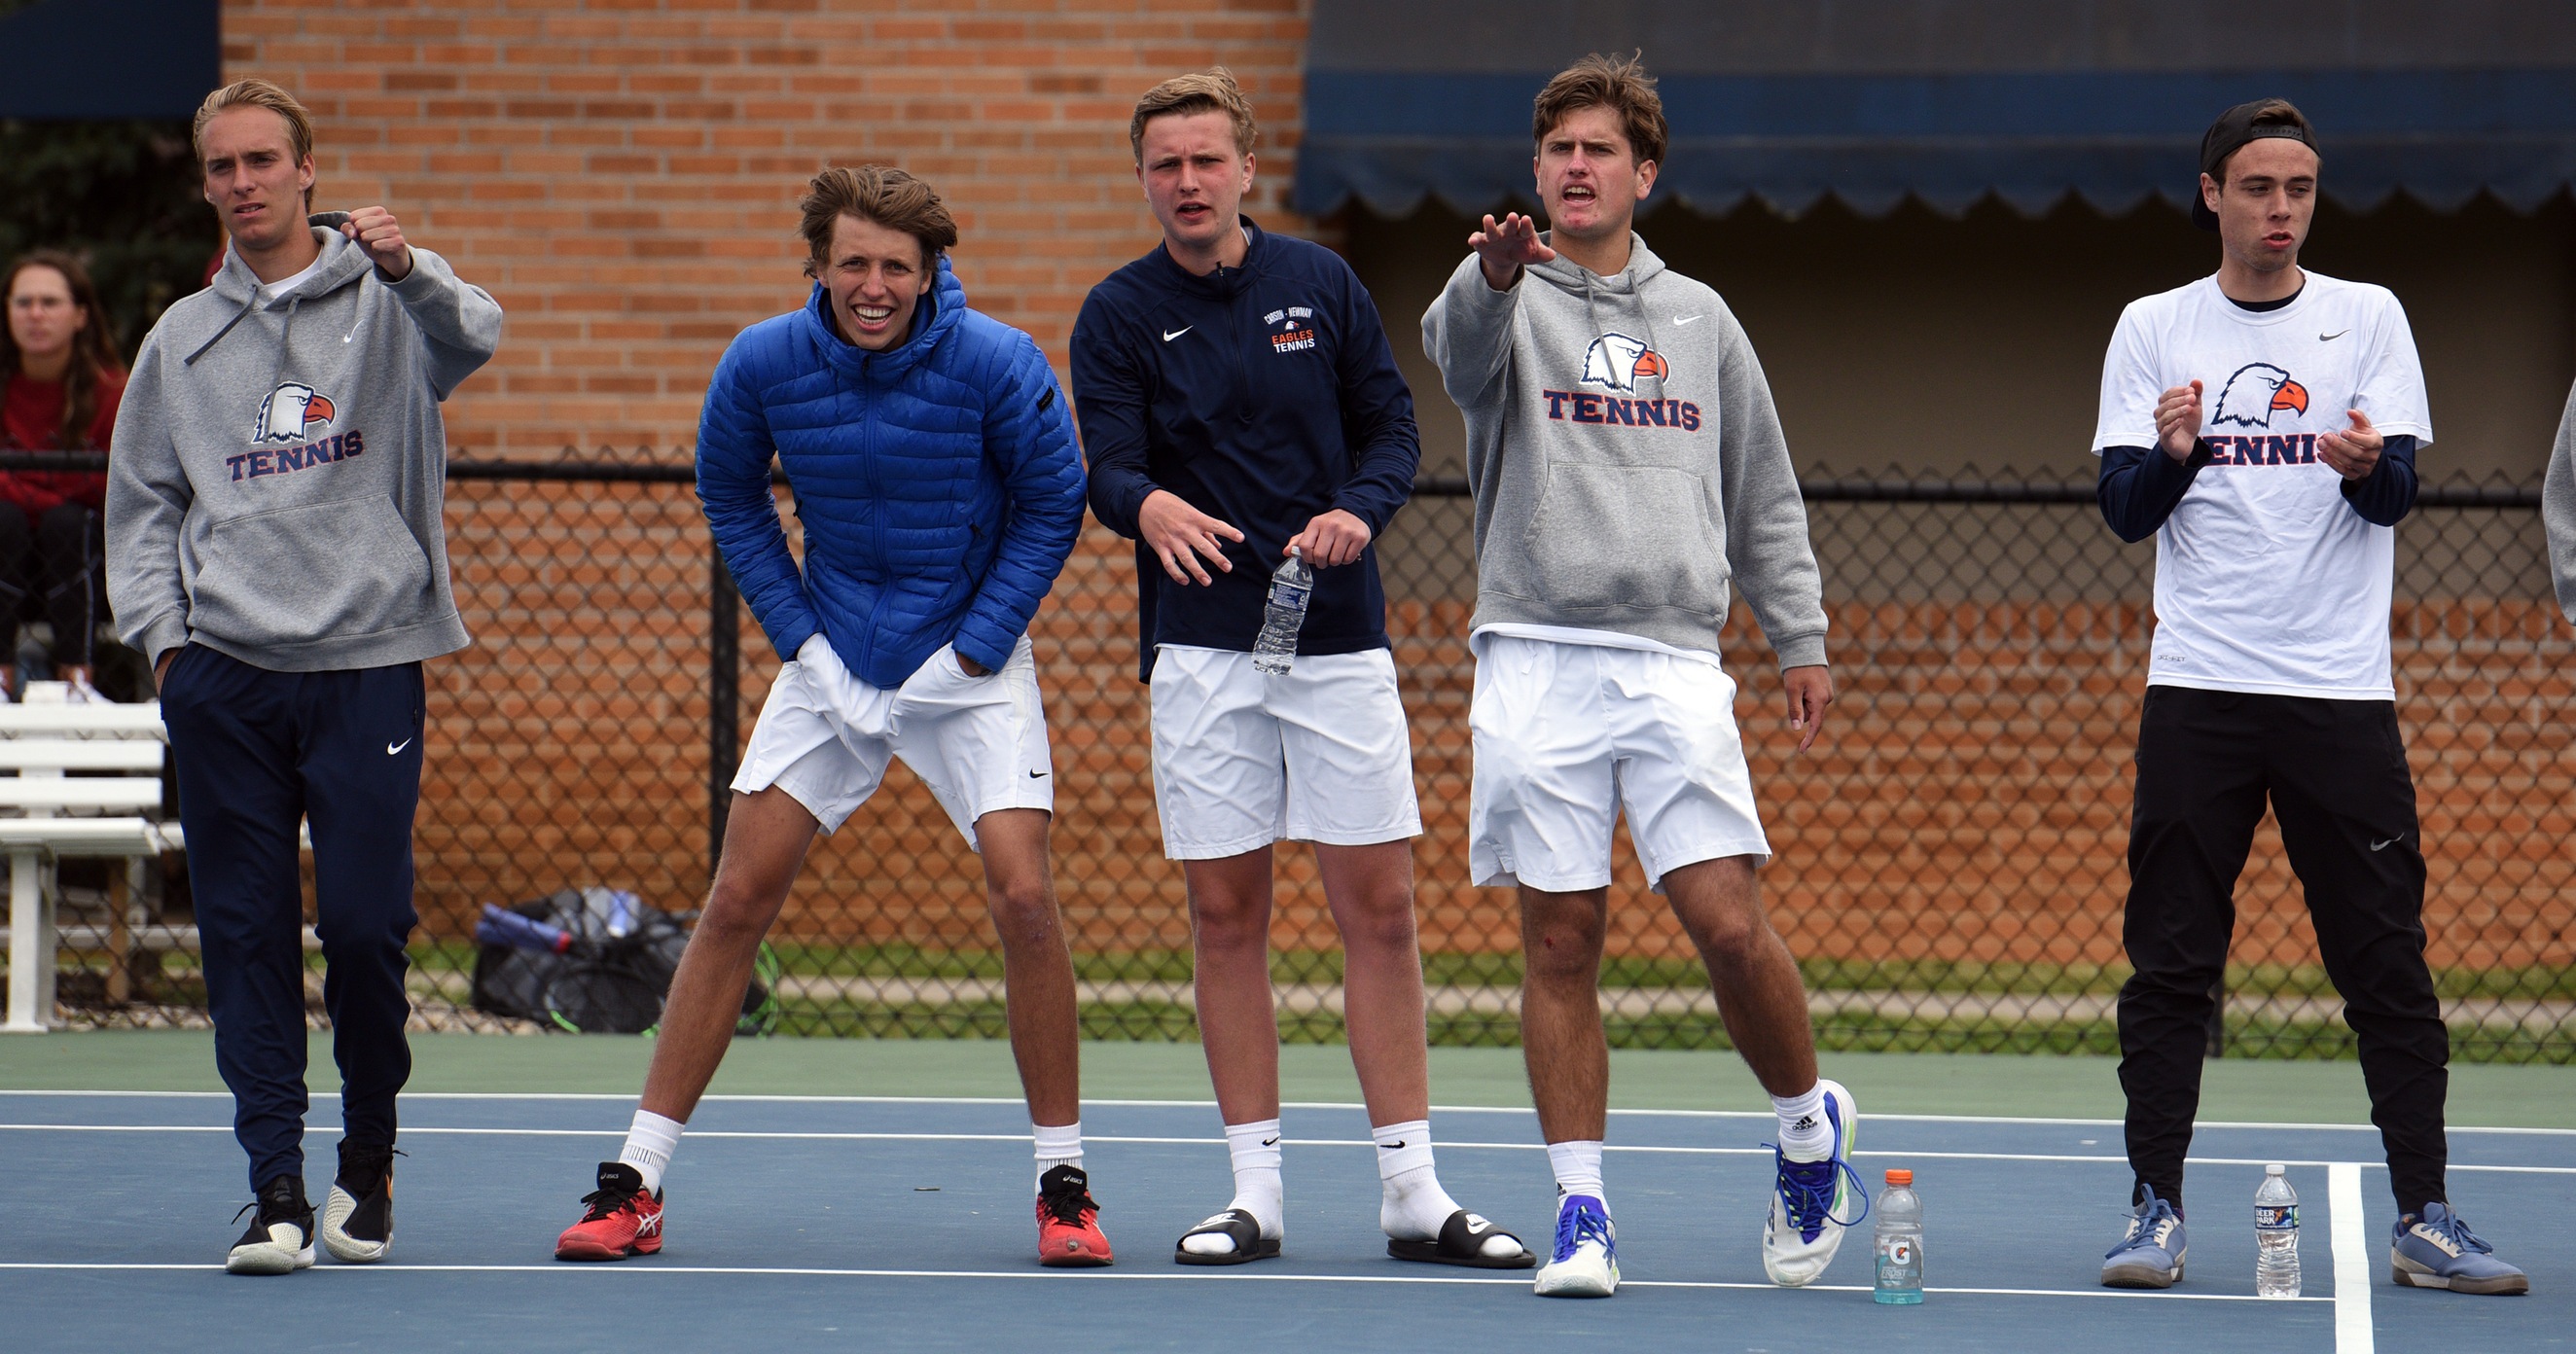 Janse, Oka, and Crespo move on After Day One at the ITA Regionals